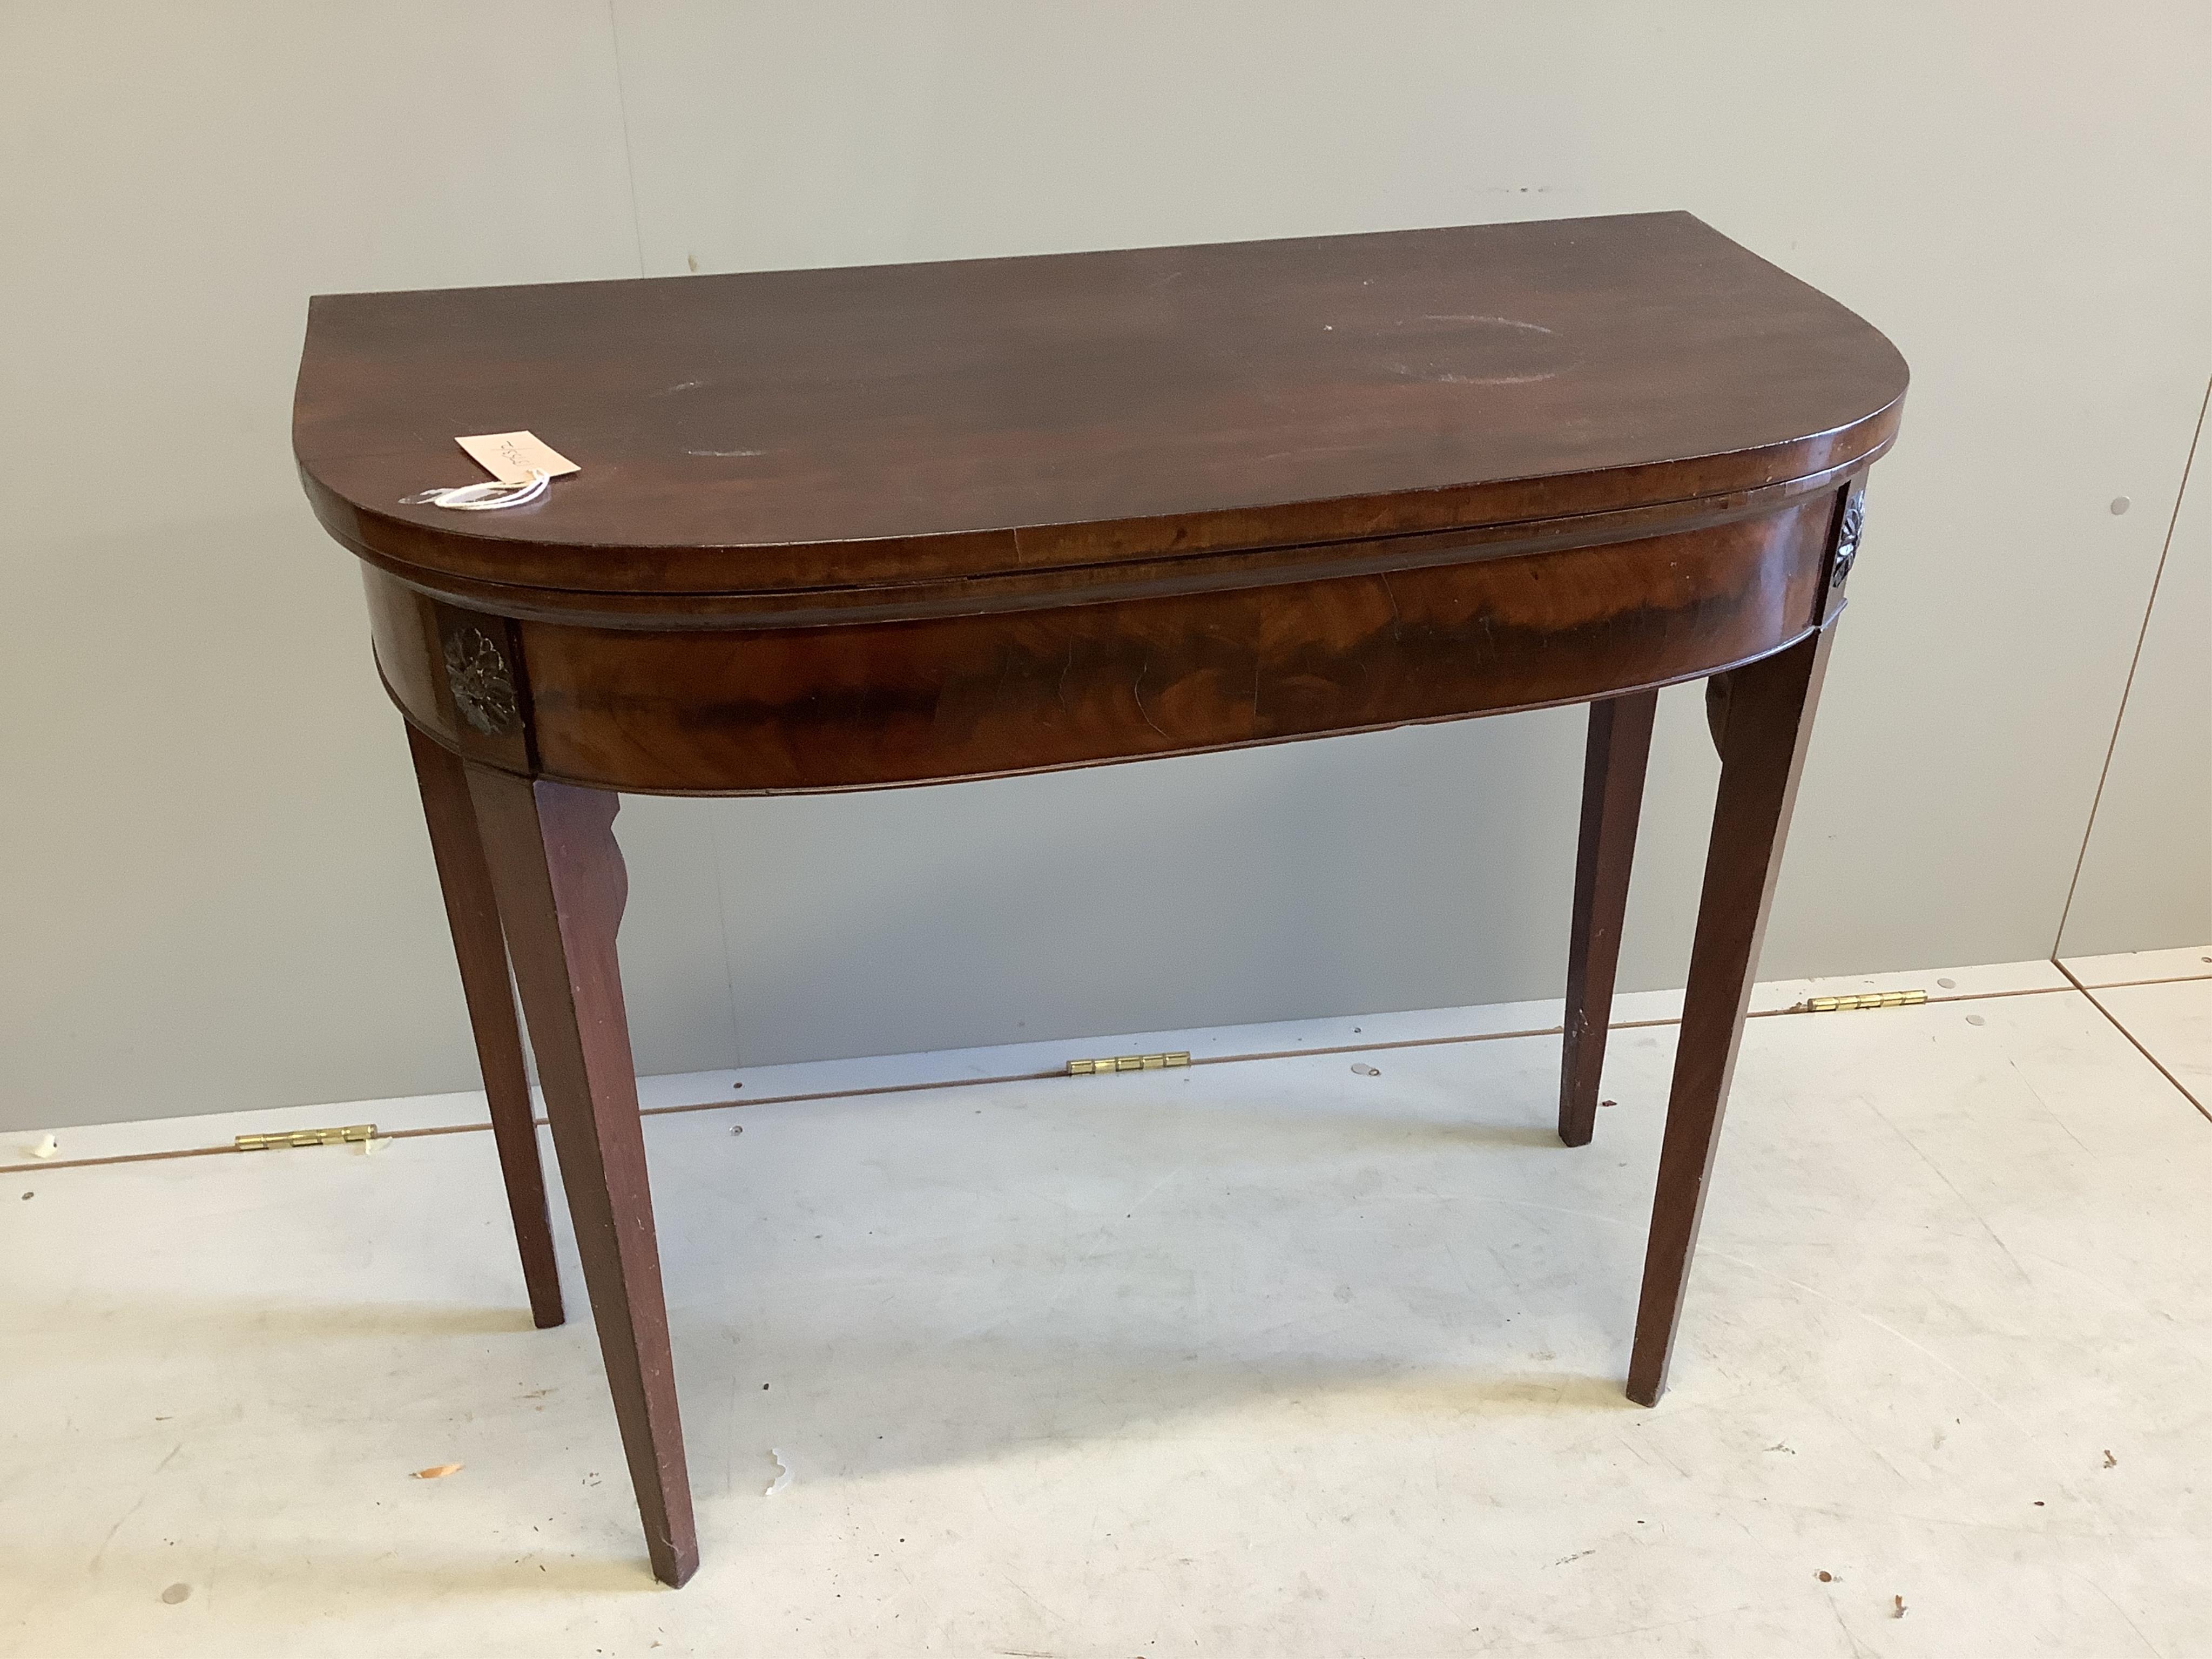 A George III mahogany D shaped folding card table, on square tapering legs, width 86cm, depth 42cm, height 73cm. Condition - poor